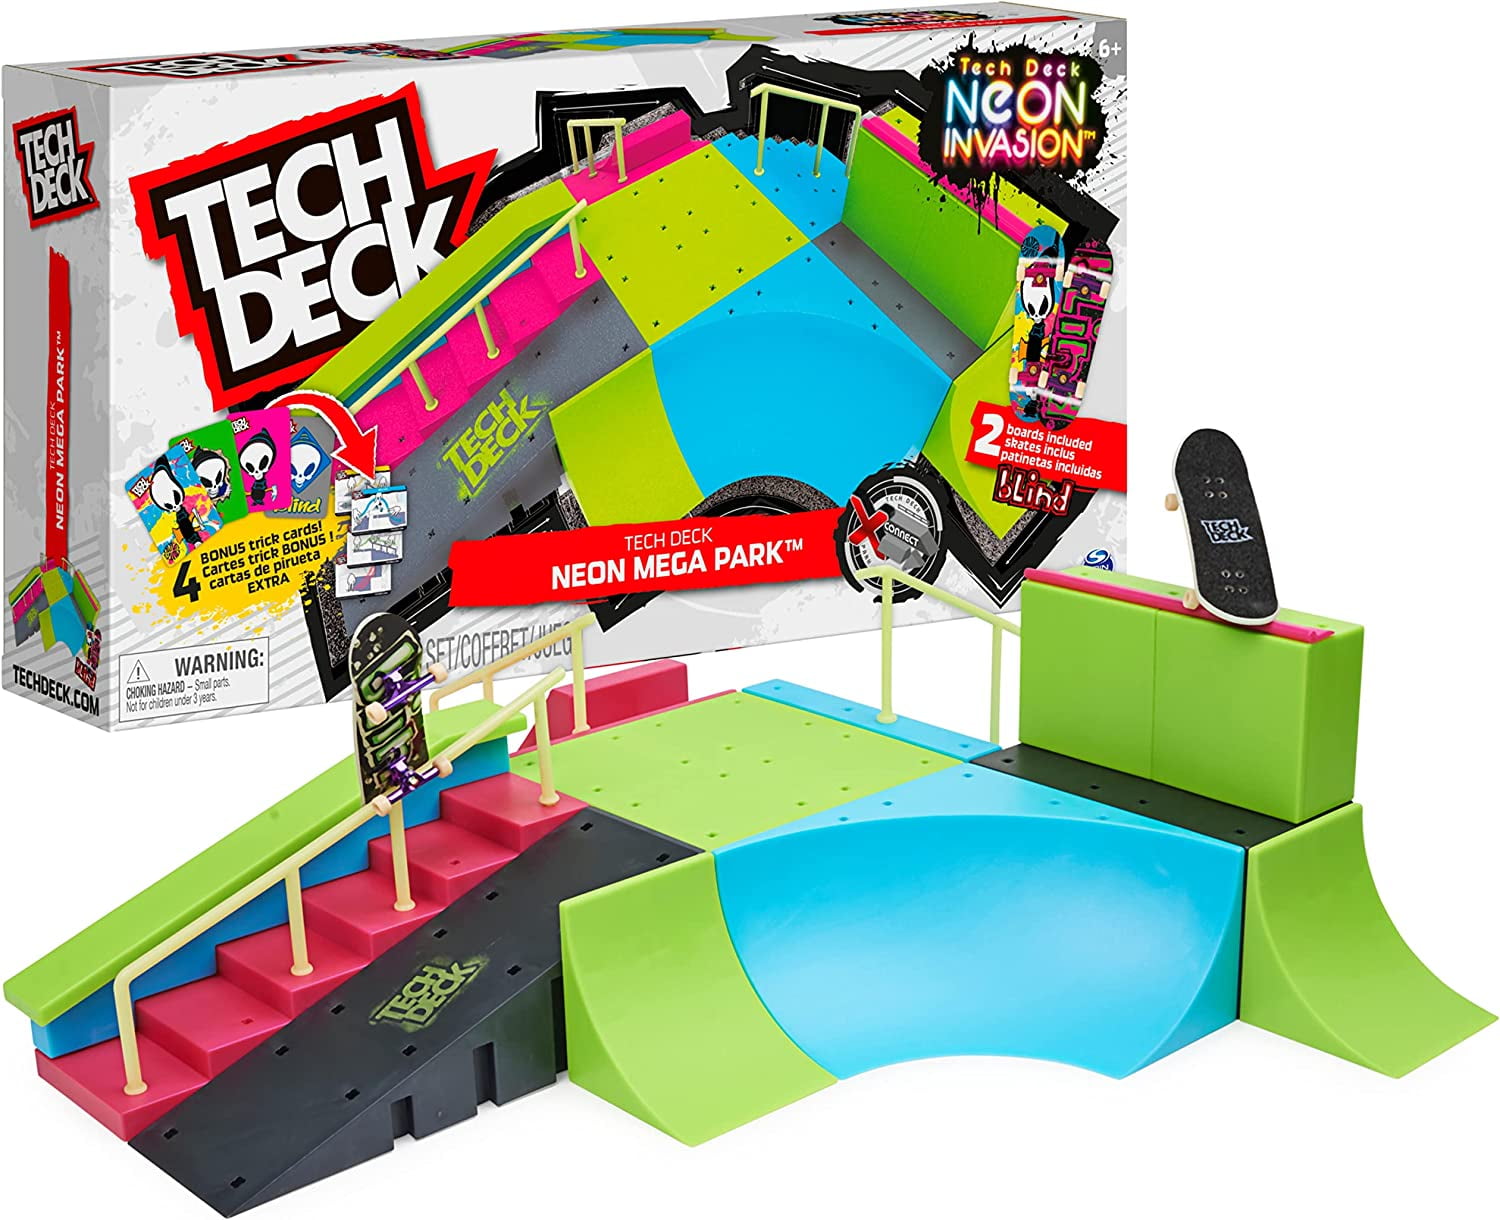 Tech Deck, Neon Mega Park X-Connect Creator, Customizable Glow-in-The-Dark  Ramp Set with 2 Blind Skateboard Fingerboards, 90+ Pieces, Gift for Ages 6+